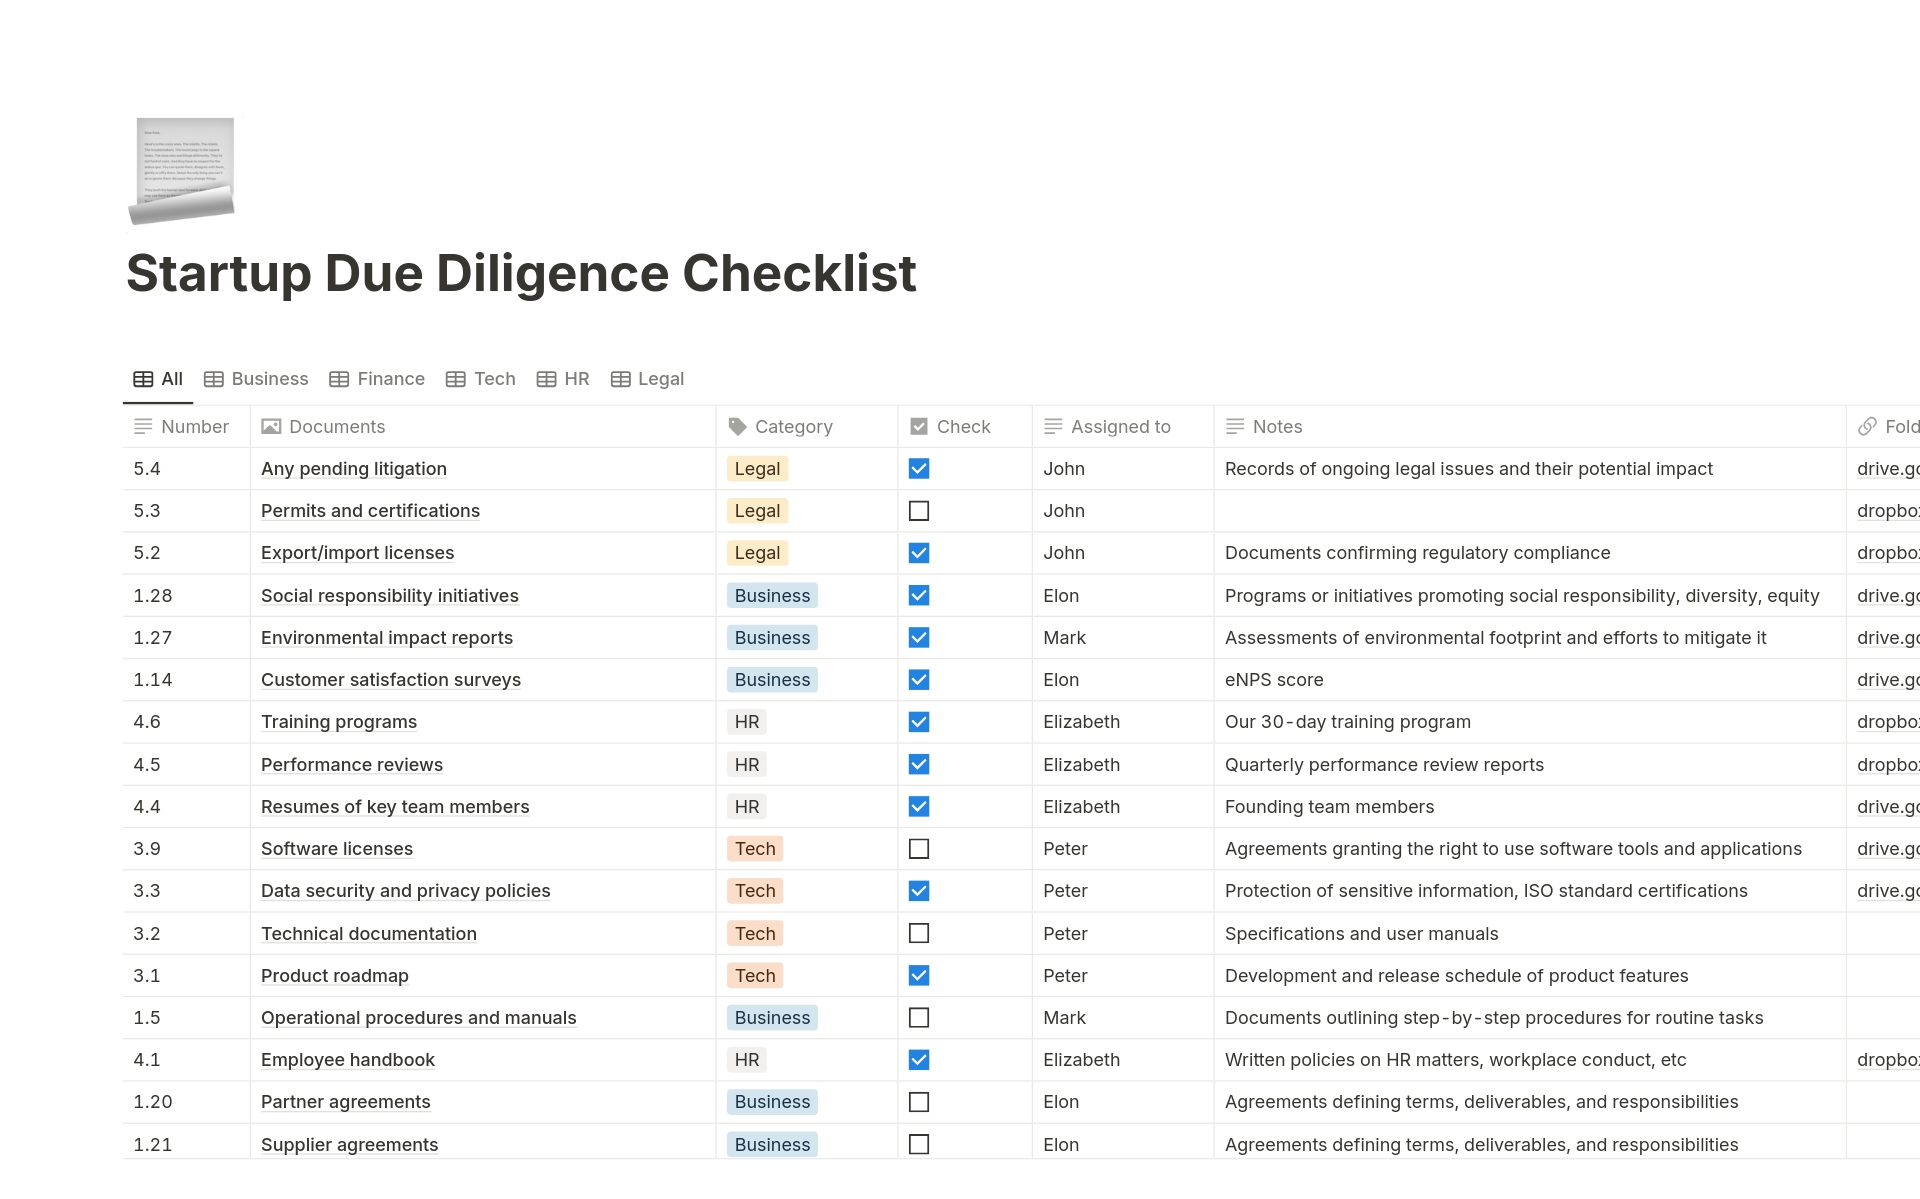 Accelerate your startup's funding round closure with this extensive due diligence checklist, accessible in Notion and Excel.